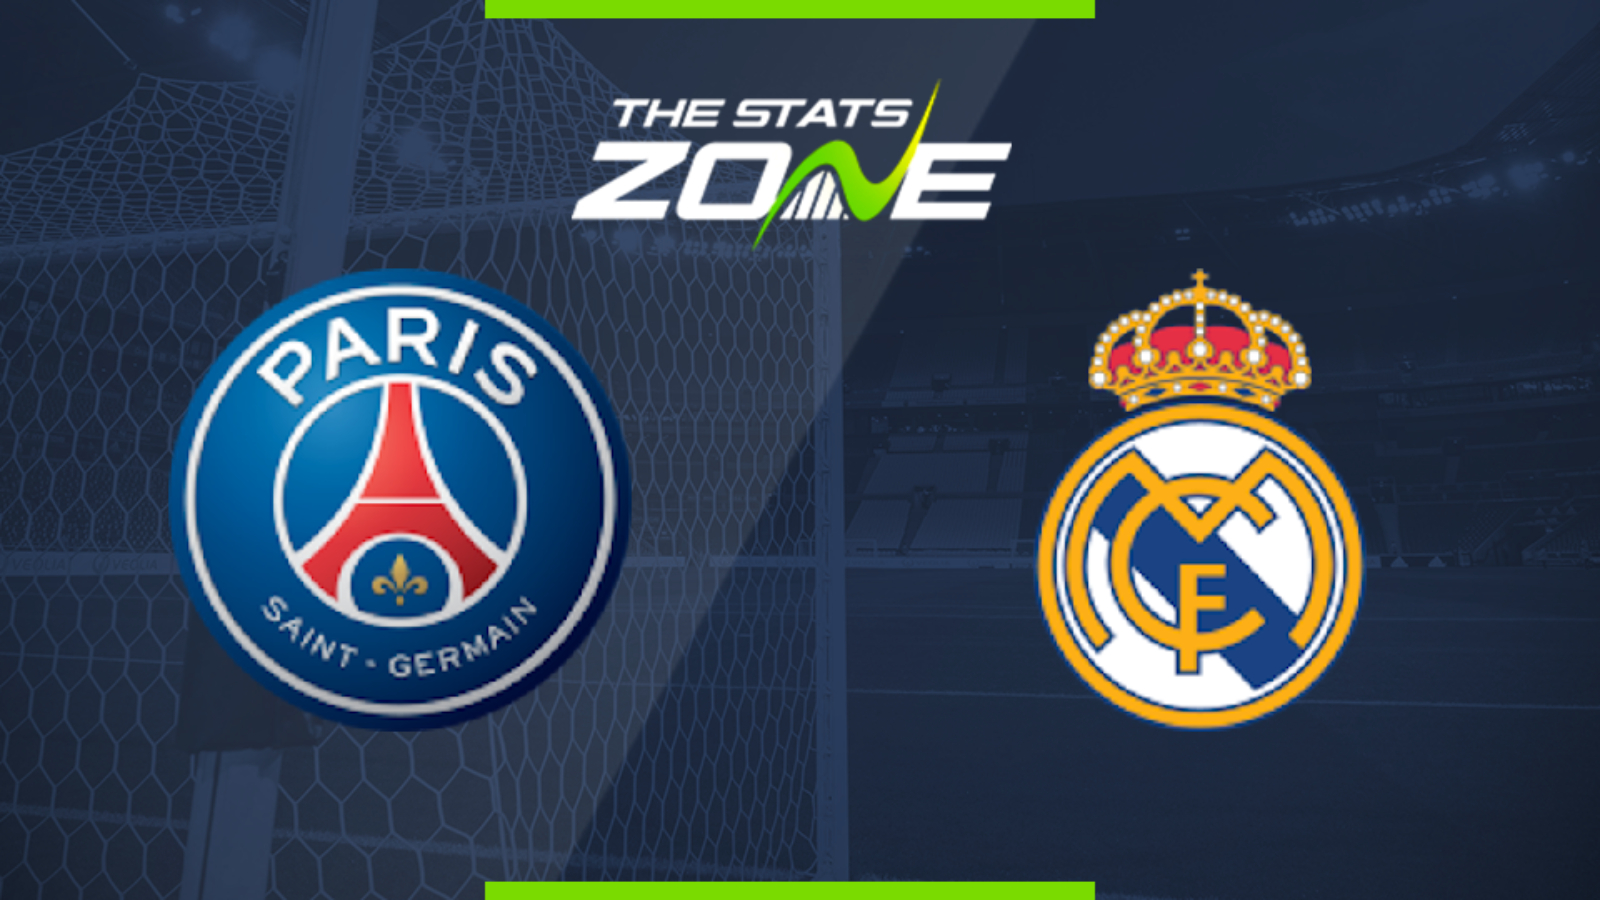 201920 UEFA Champions League – PSG vs Real Madrid Preview  Prediction  The Stats Zone